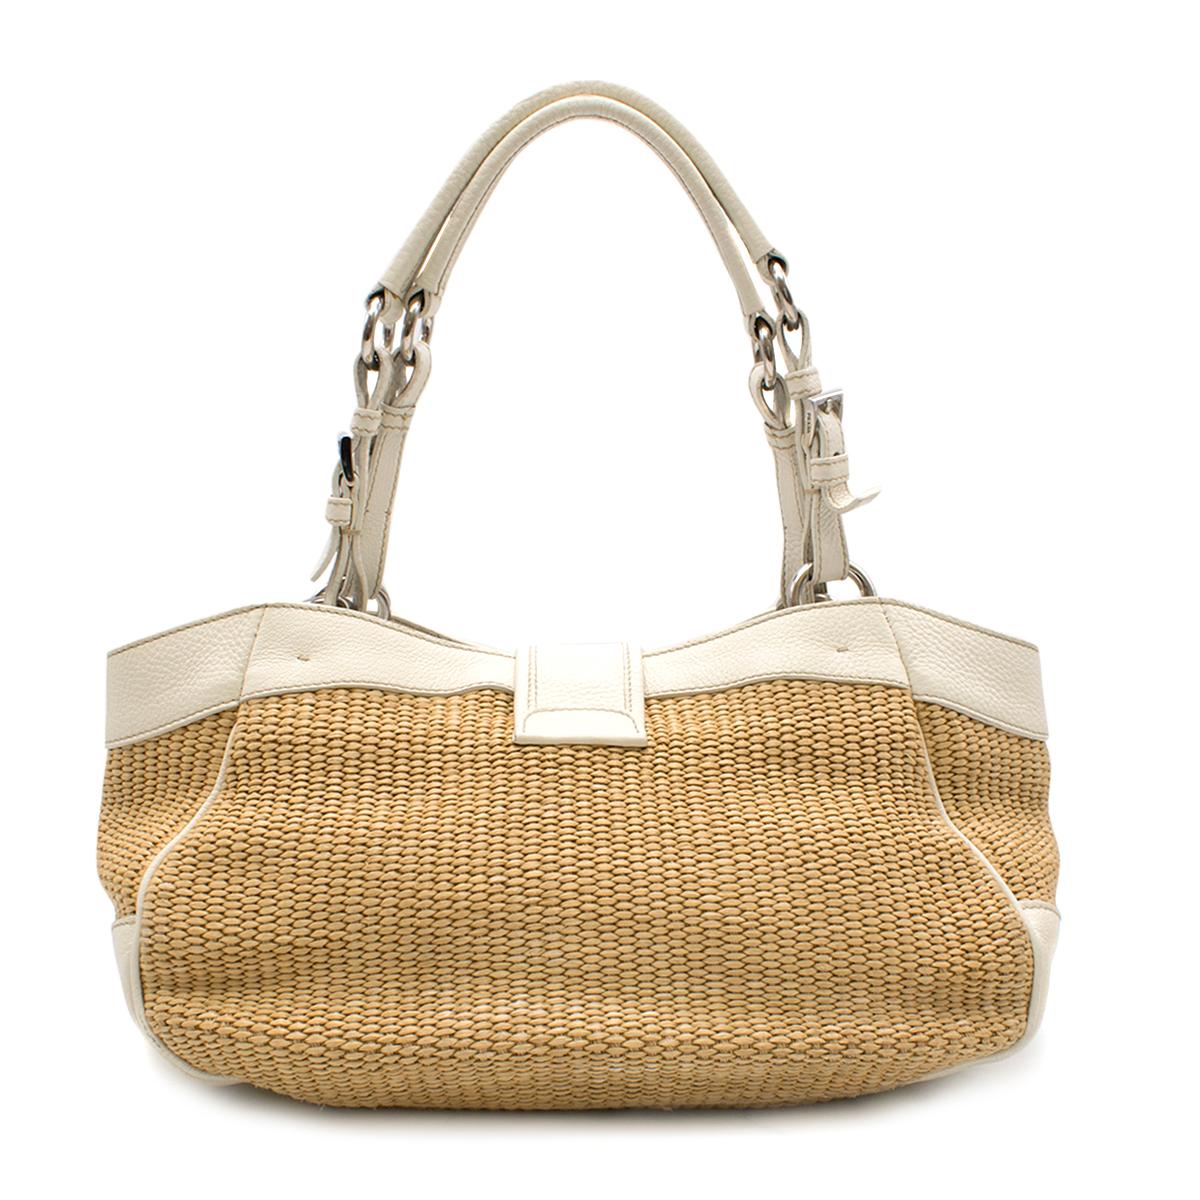 Prada White Leather Wicker Hand Bag

- White leather hand bag 
- Wicker main body 
- White leather hands
- Two front Push button pockets 
- Front of the bag embellished with faux buckles
- One main compartment 
- Flip and magnetic button fastening